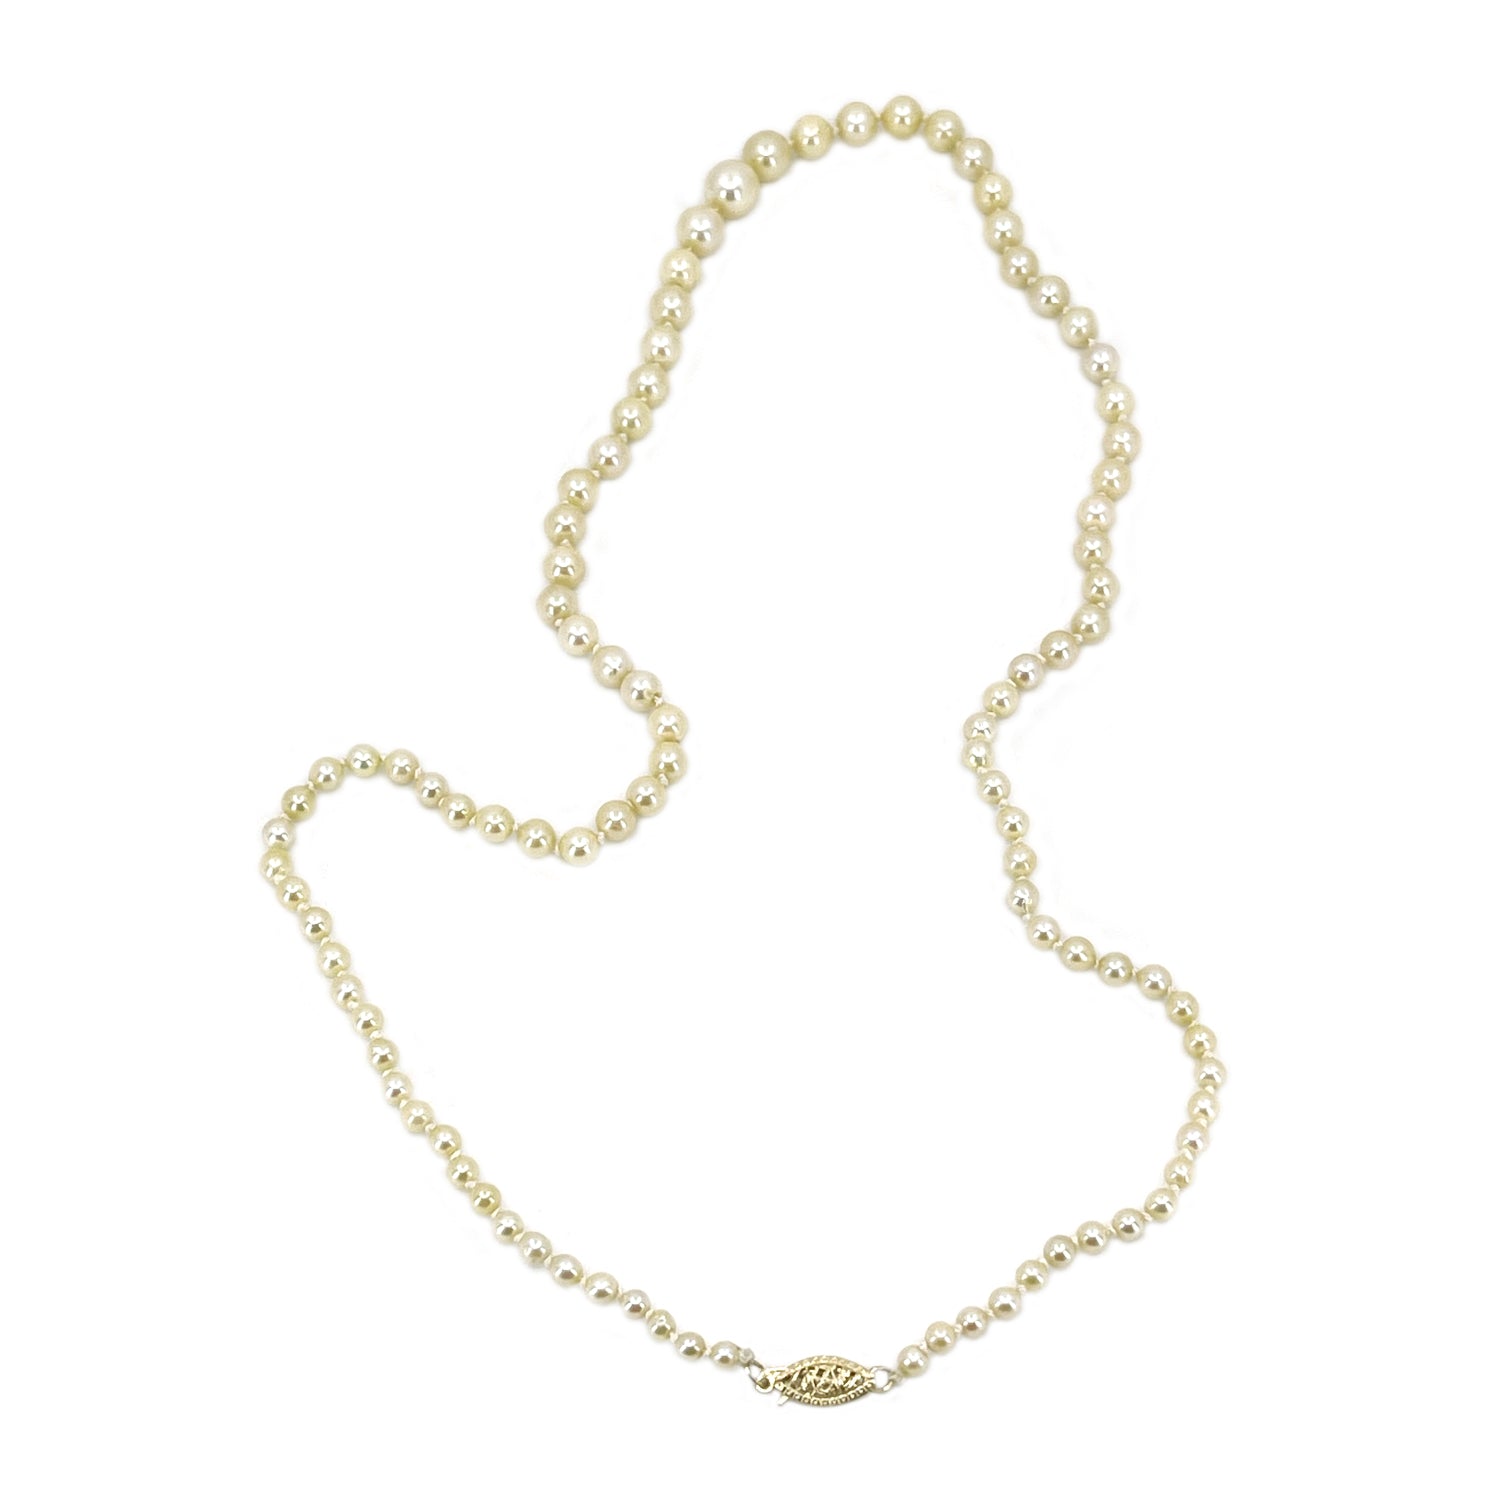 Golden Cream Estate Japanese Cultured Saltwater Akoya Pearl Vintage Necklace - 14K Yellow Gold 21 Inch